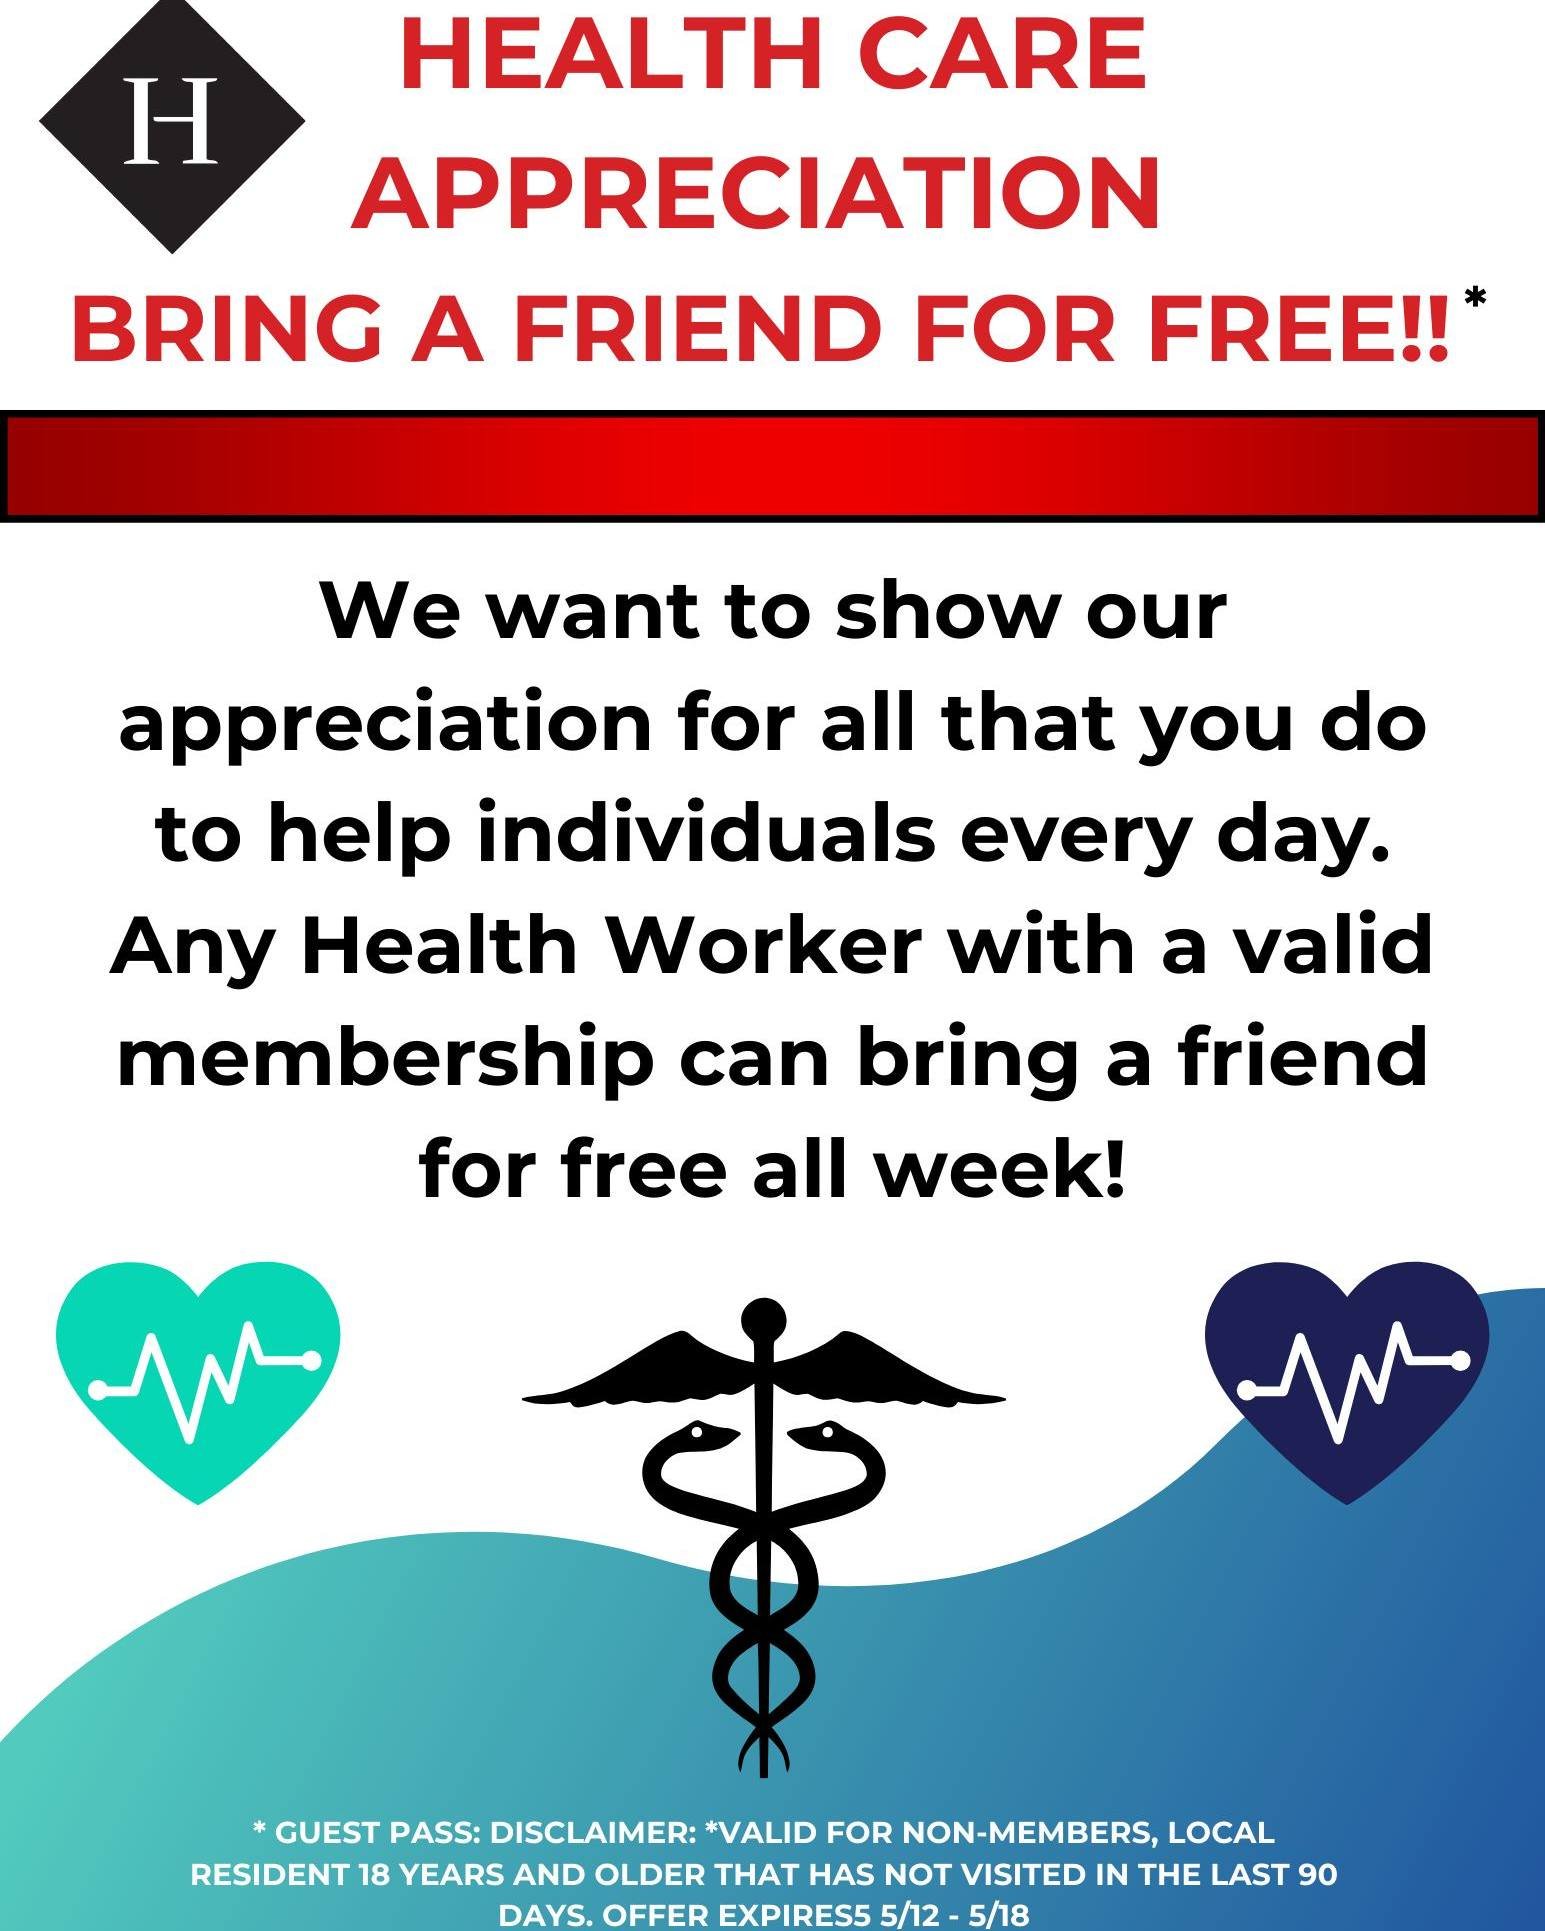 Bring your fellow Health Care friend for FREE, the week of 5/12 to 5/18. 
Let us show you how much we appreciate you!!! 💪💪

 #healthbenefits #personaltraining #gymmotivation #healthtraxwarwick #getfit #warwickri #Healthcare #healthcarejobs #healthc